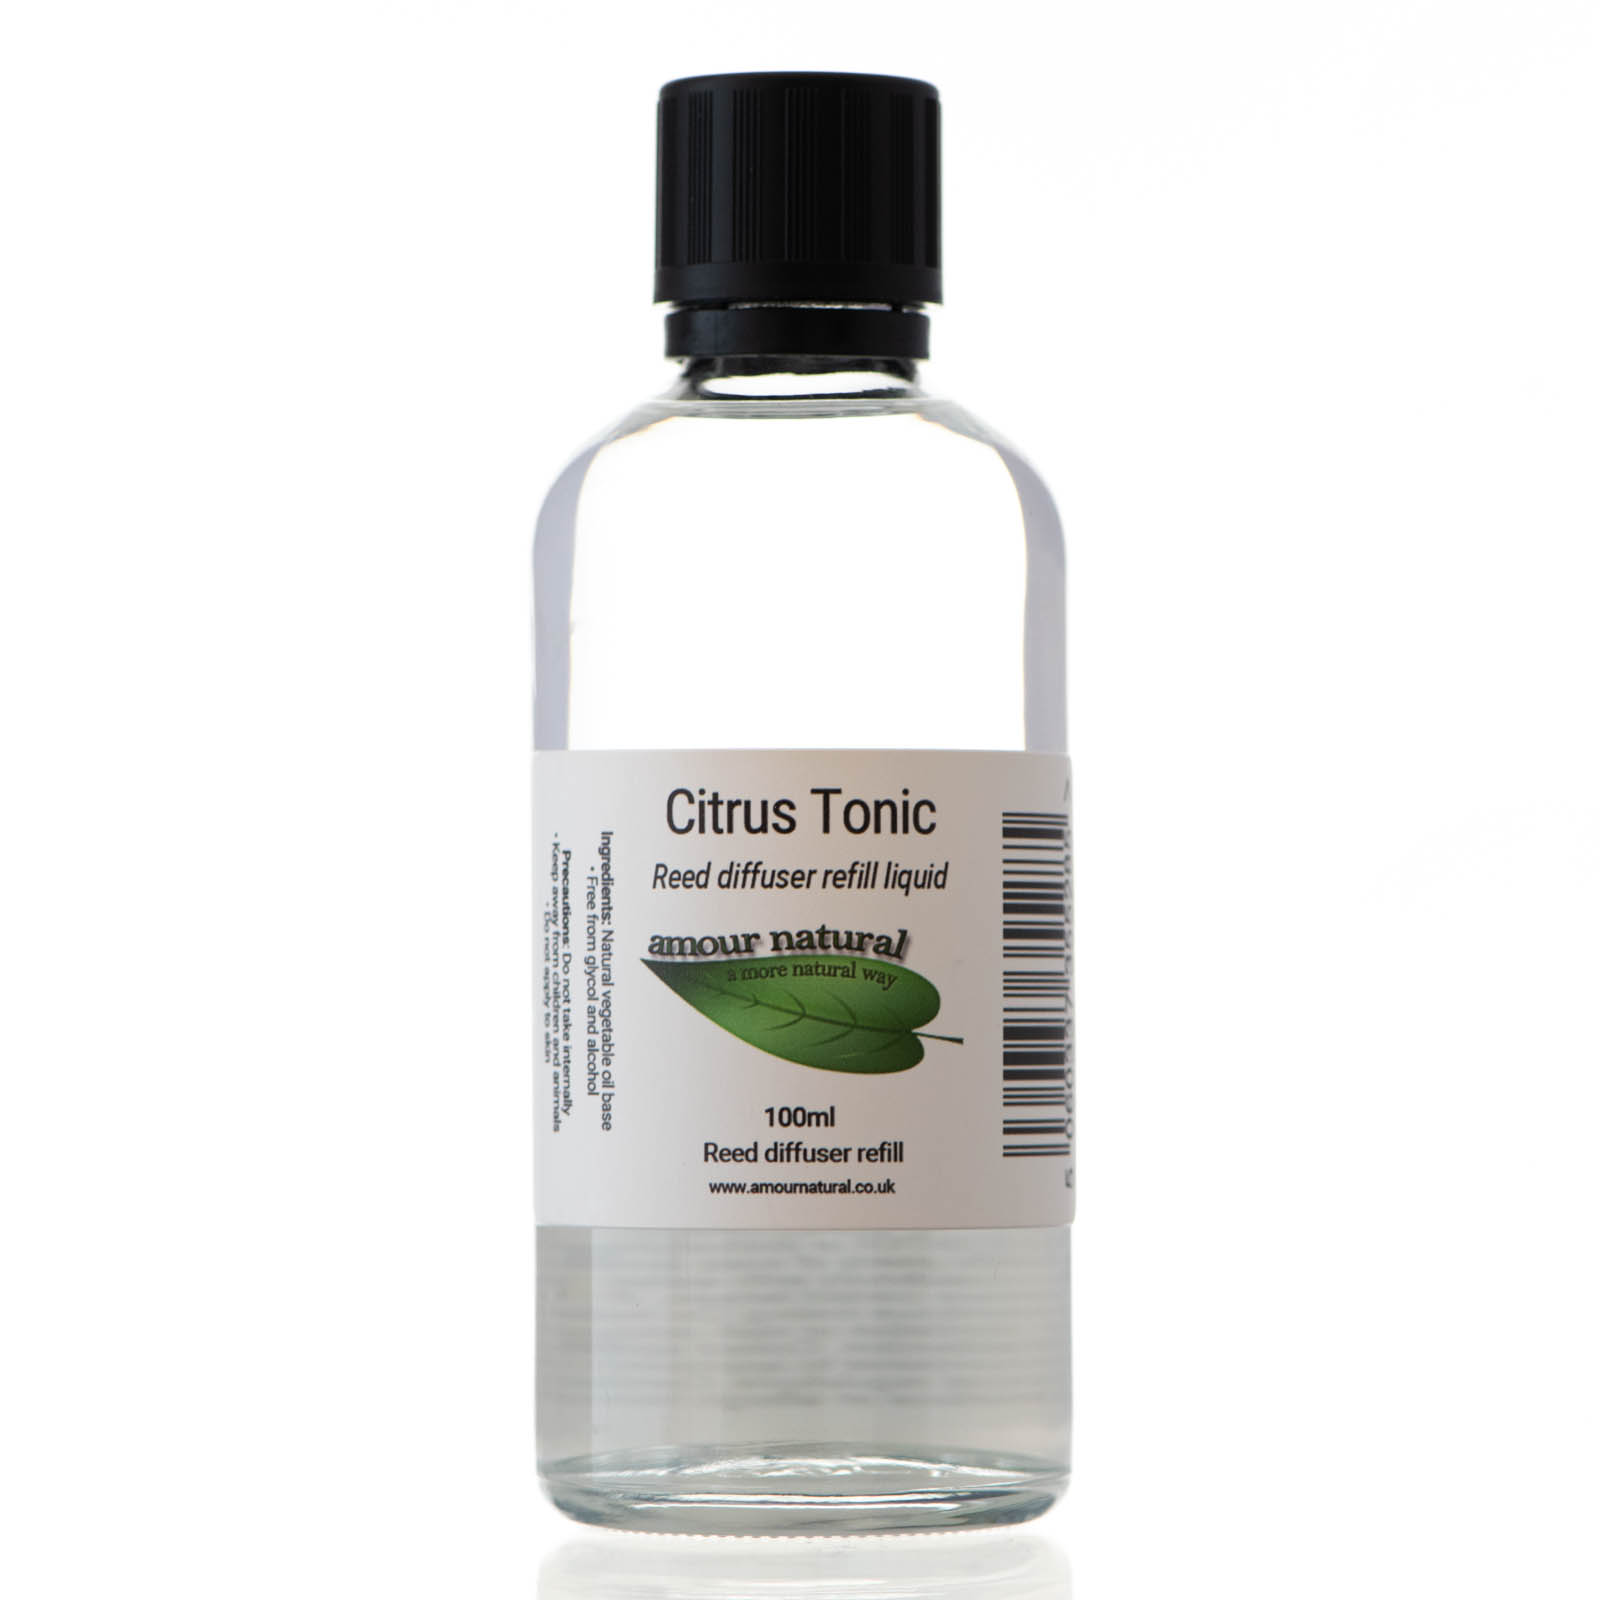 Citrus Tonic reed diffuser refill (bottle only)